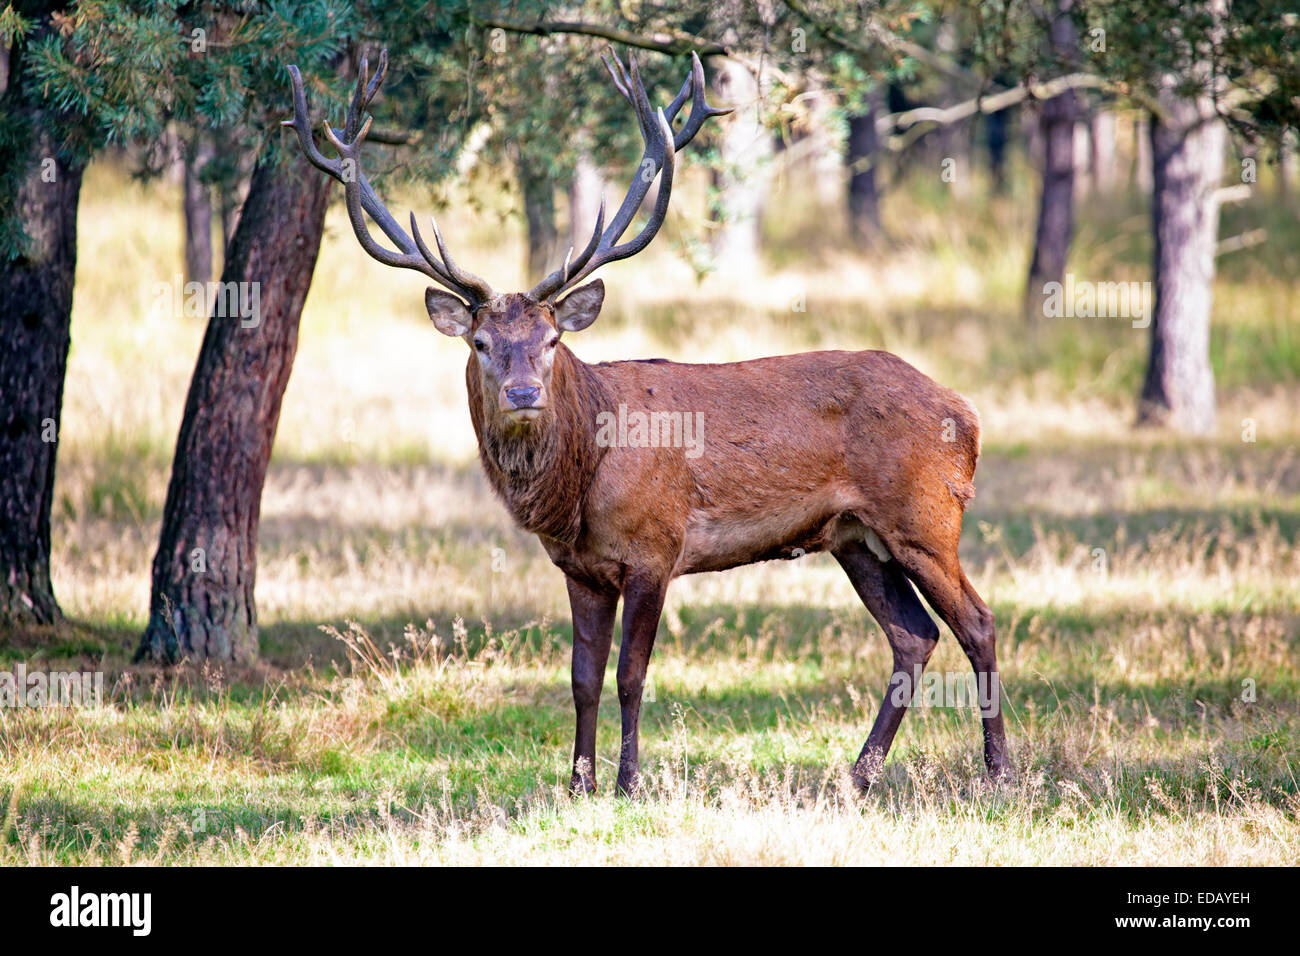 Deer in the forest Stock Photo